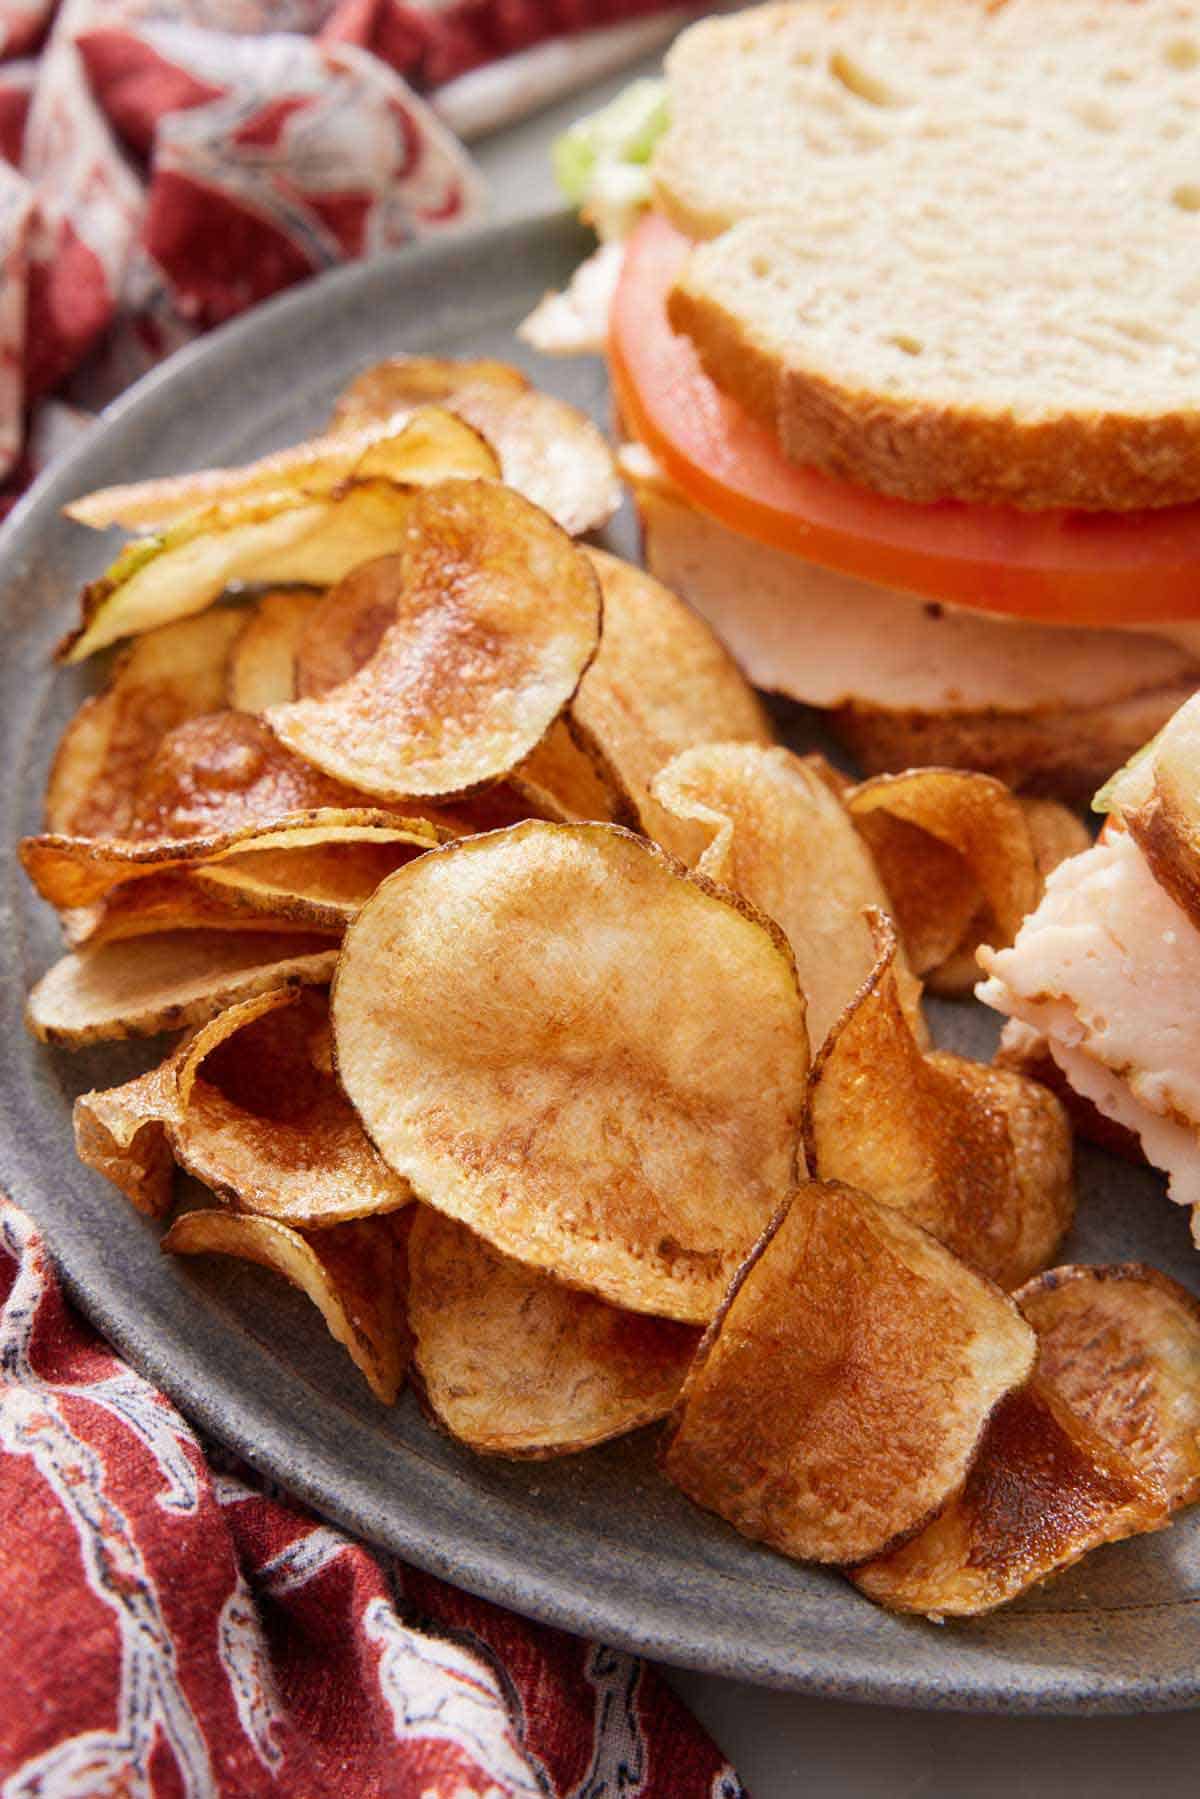 A close up view of chips on a plate with a sandwich.